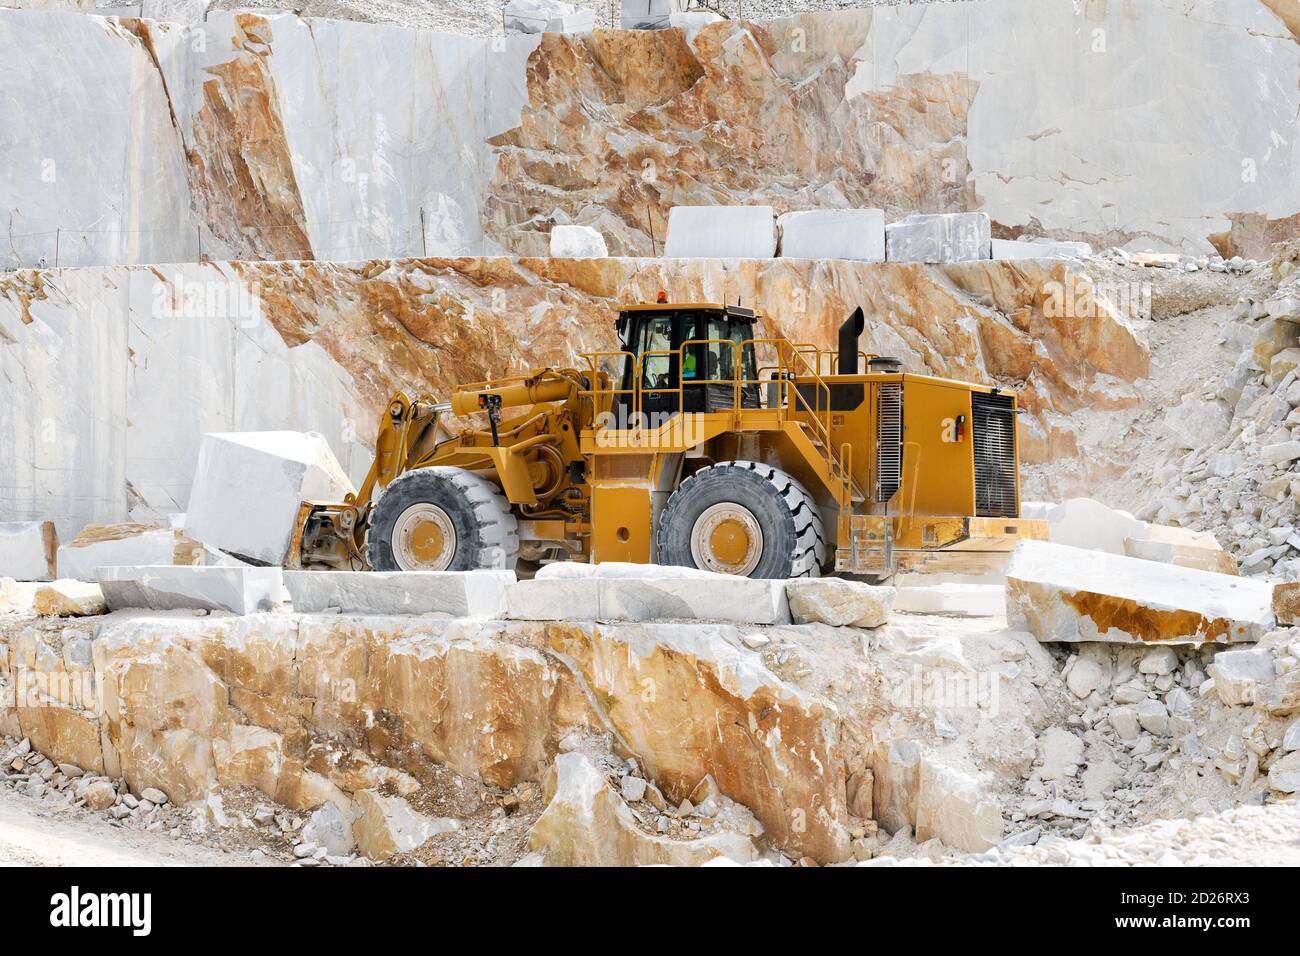 Heavy duty front end loader transporting marble in an open cast quarry or mine in Carrara, Tuscany, Italy during extraction of the rock from a mountai Stock Photo